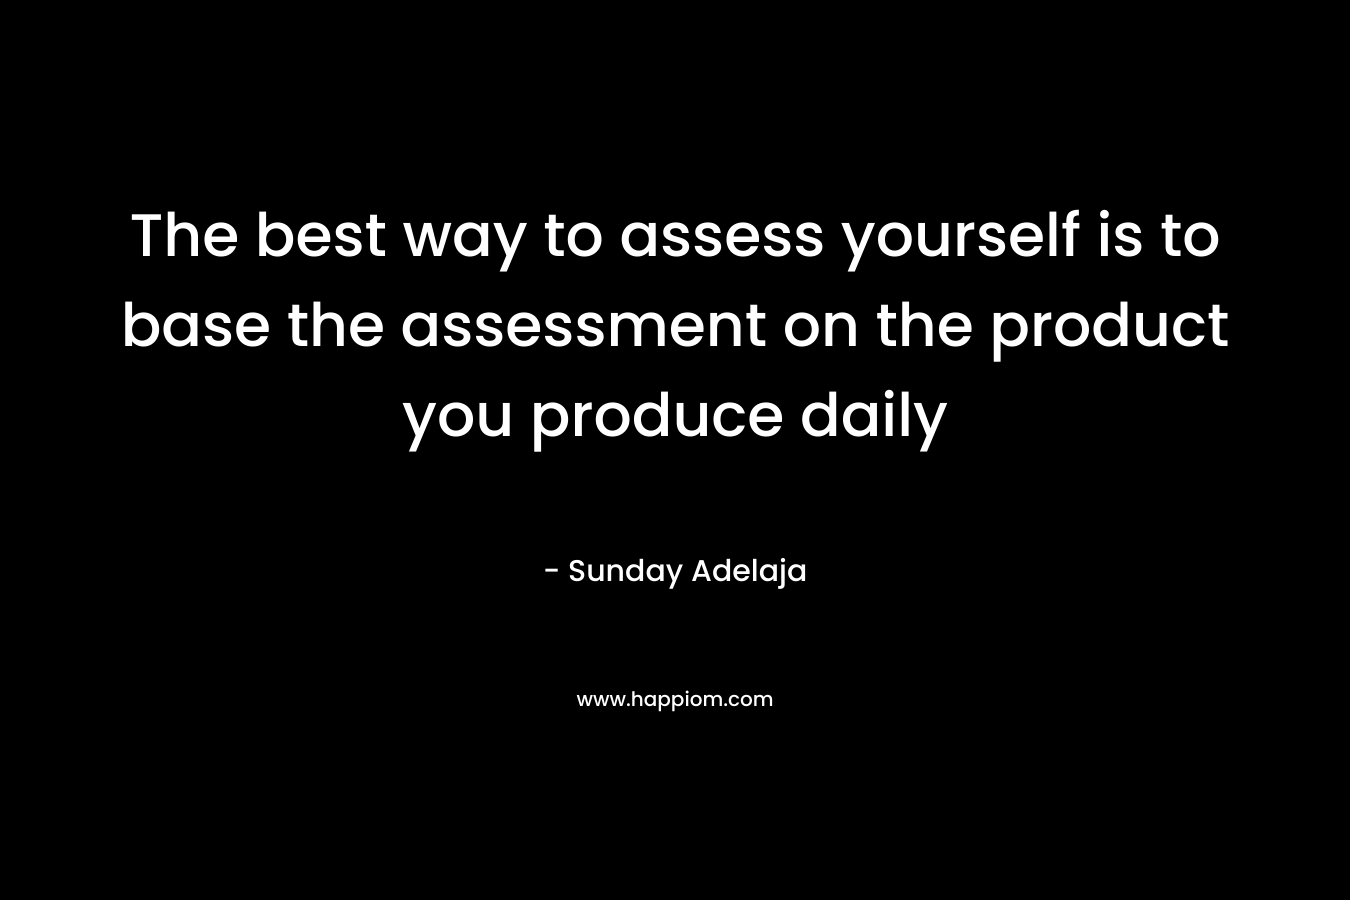 The best way to assess yourself is to base the assessment on the product you produce daily